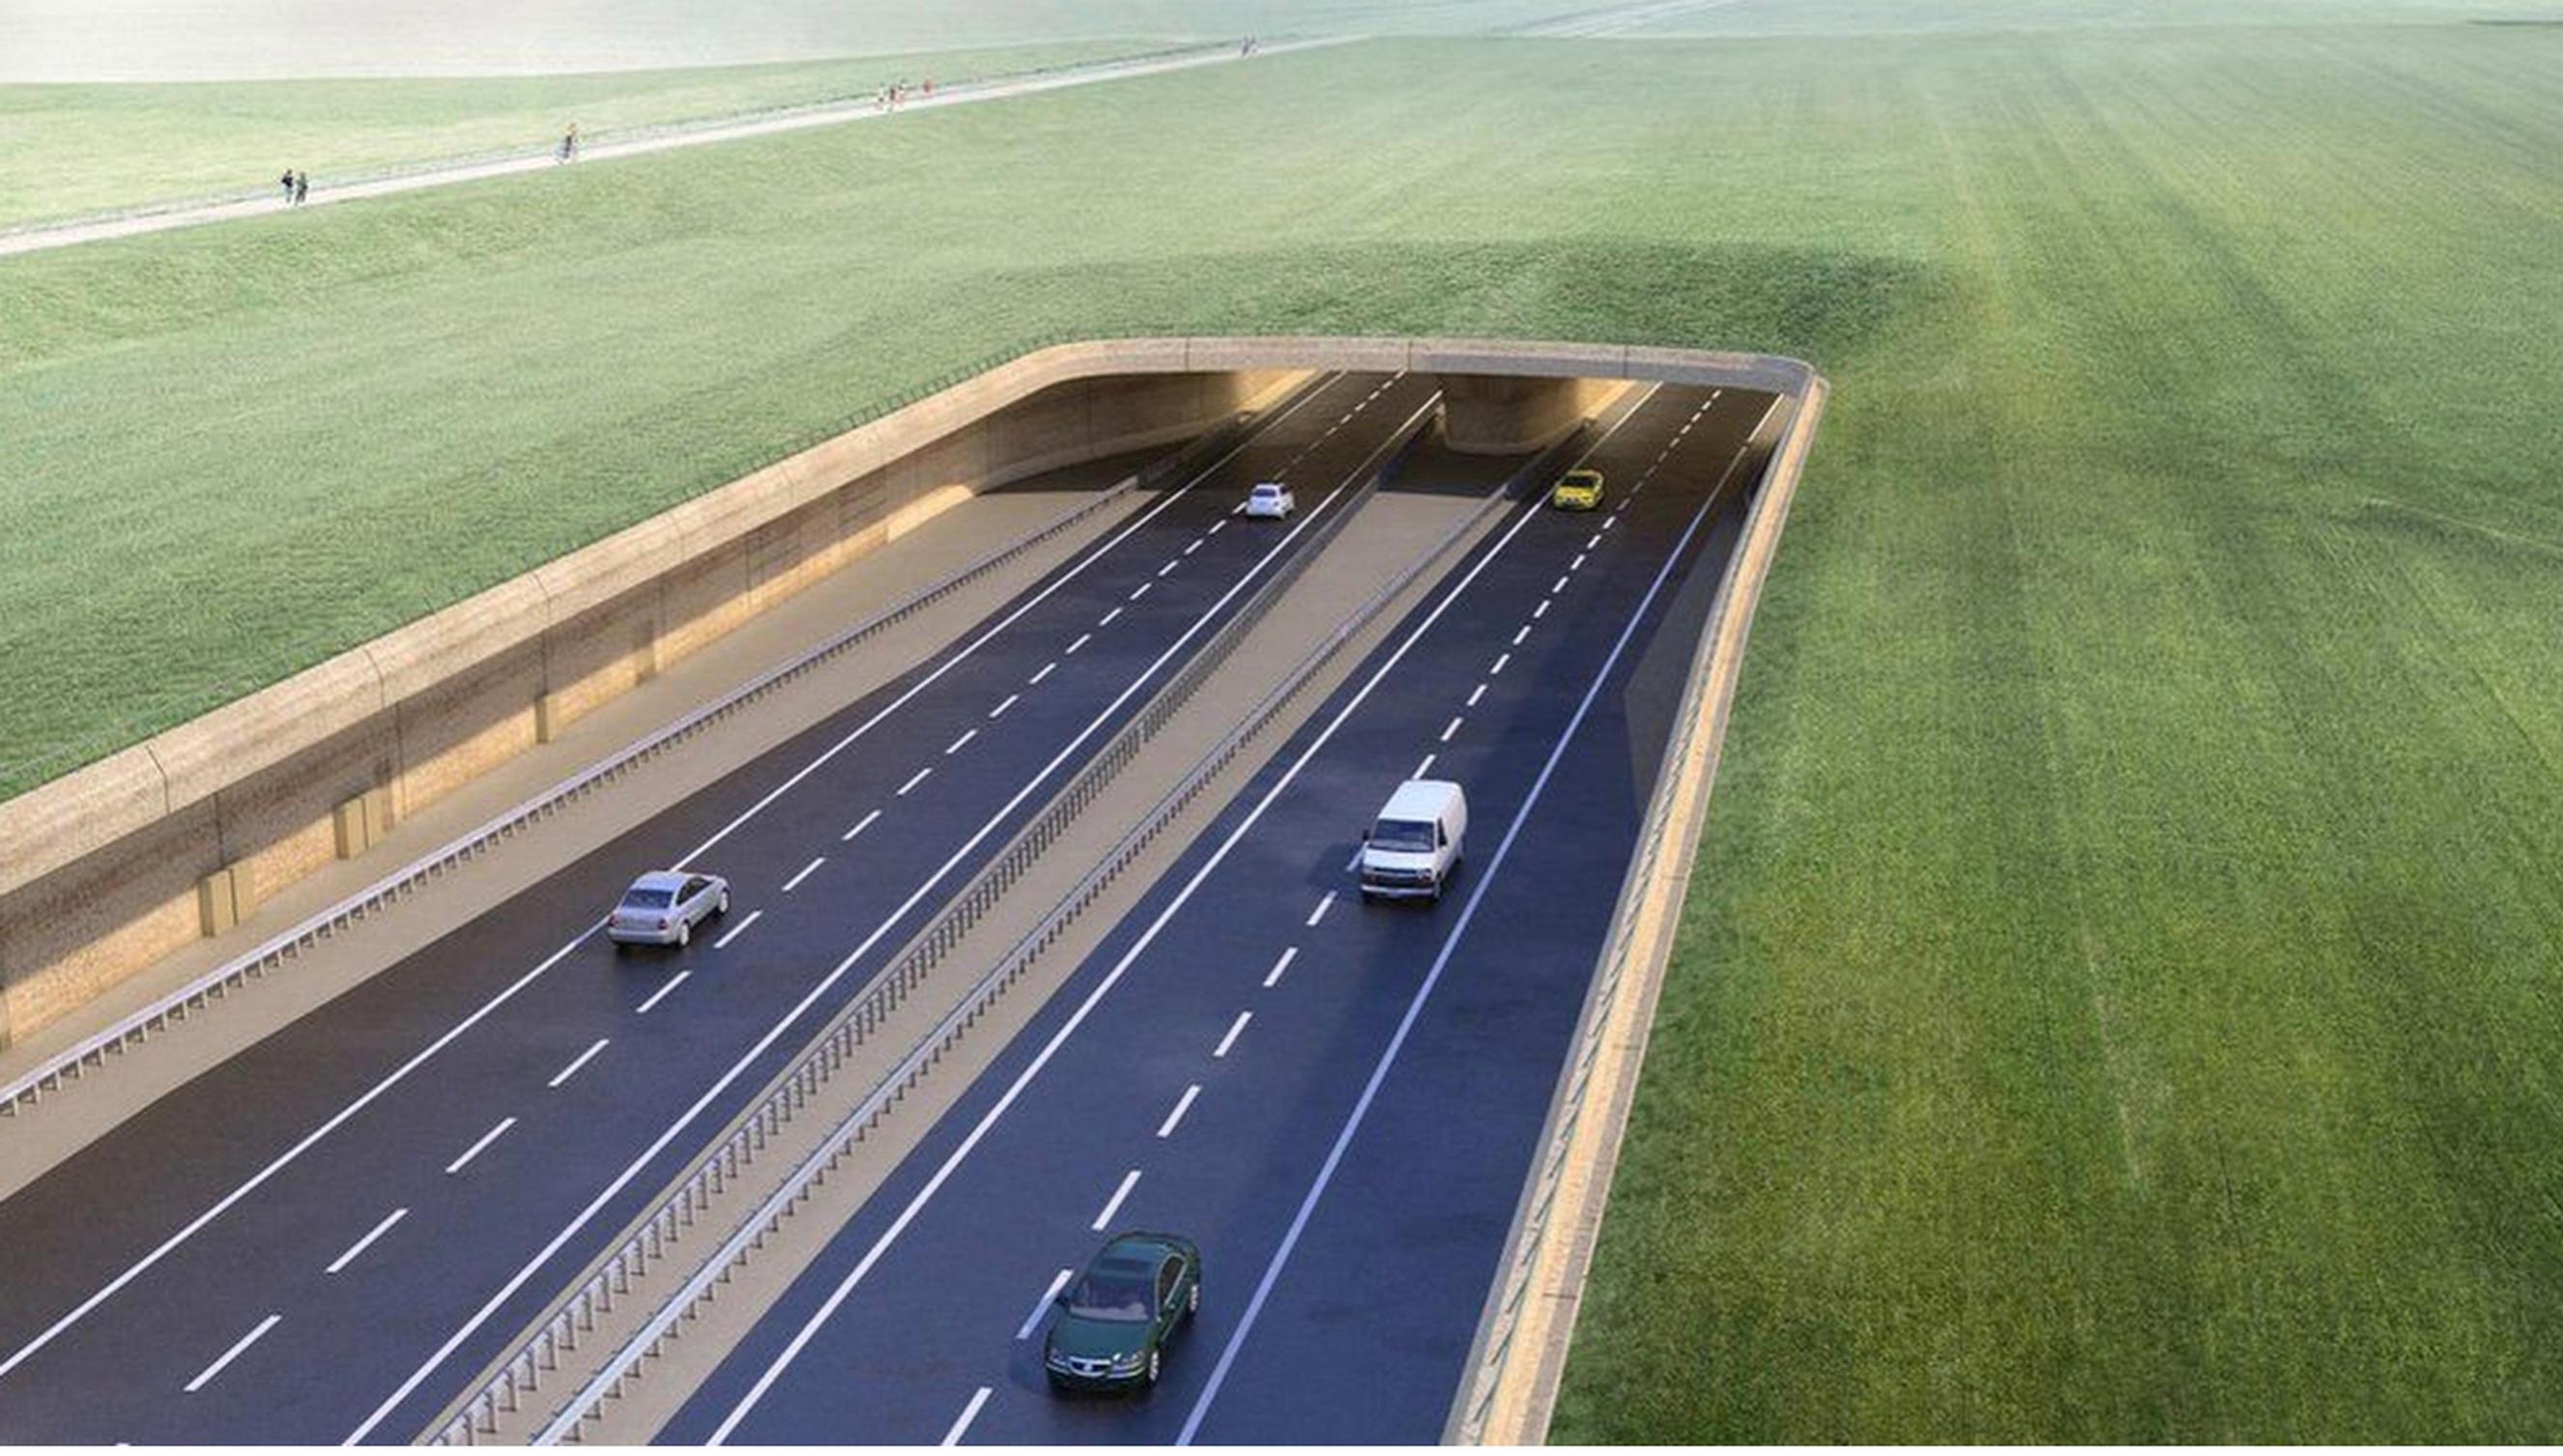 Government suggestions that new roads can meet quality standards is “fanciful” in the wake of criticism by planning inspectors of flagship schemes like the A303 Stonehenge, said TAN`s Chris Todd